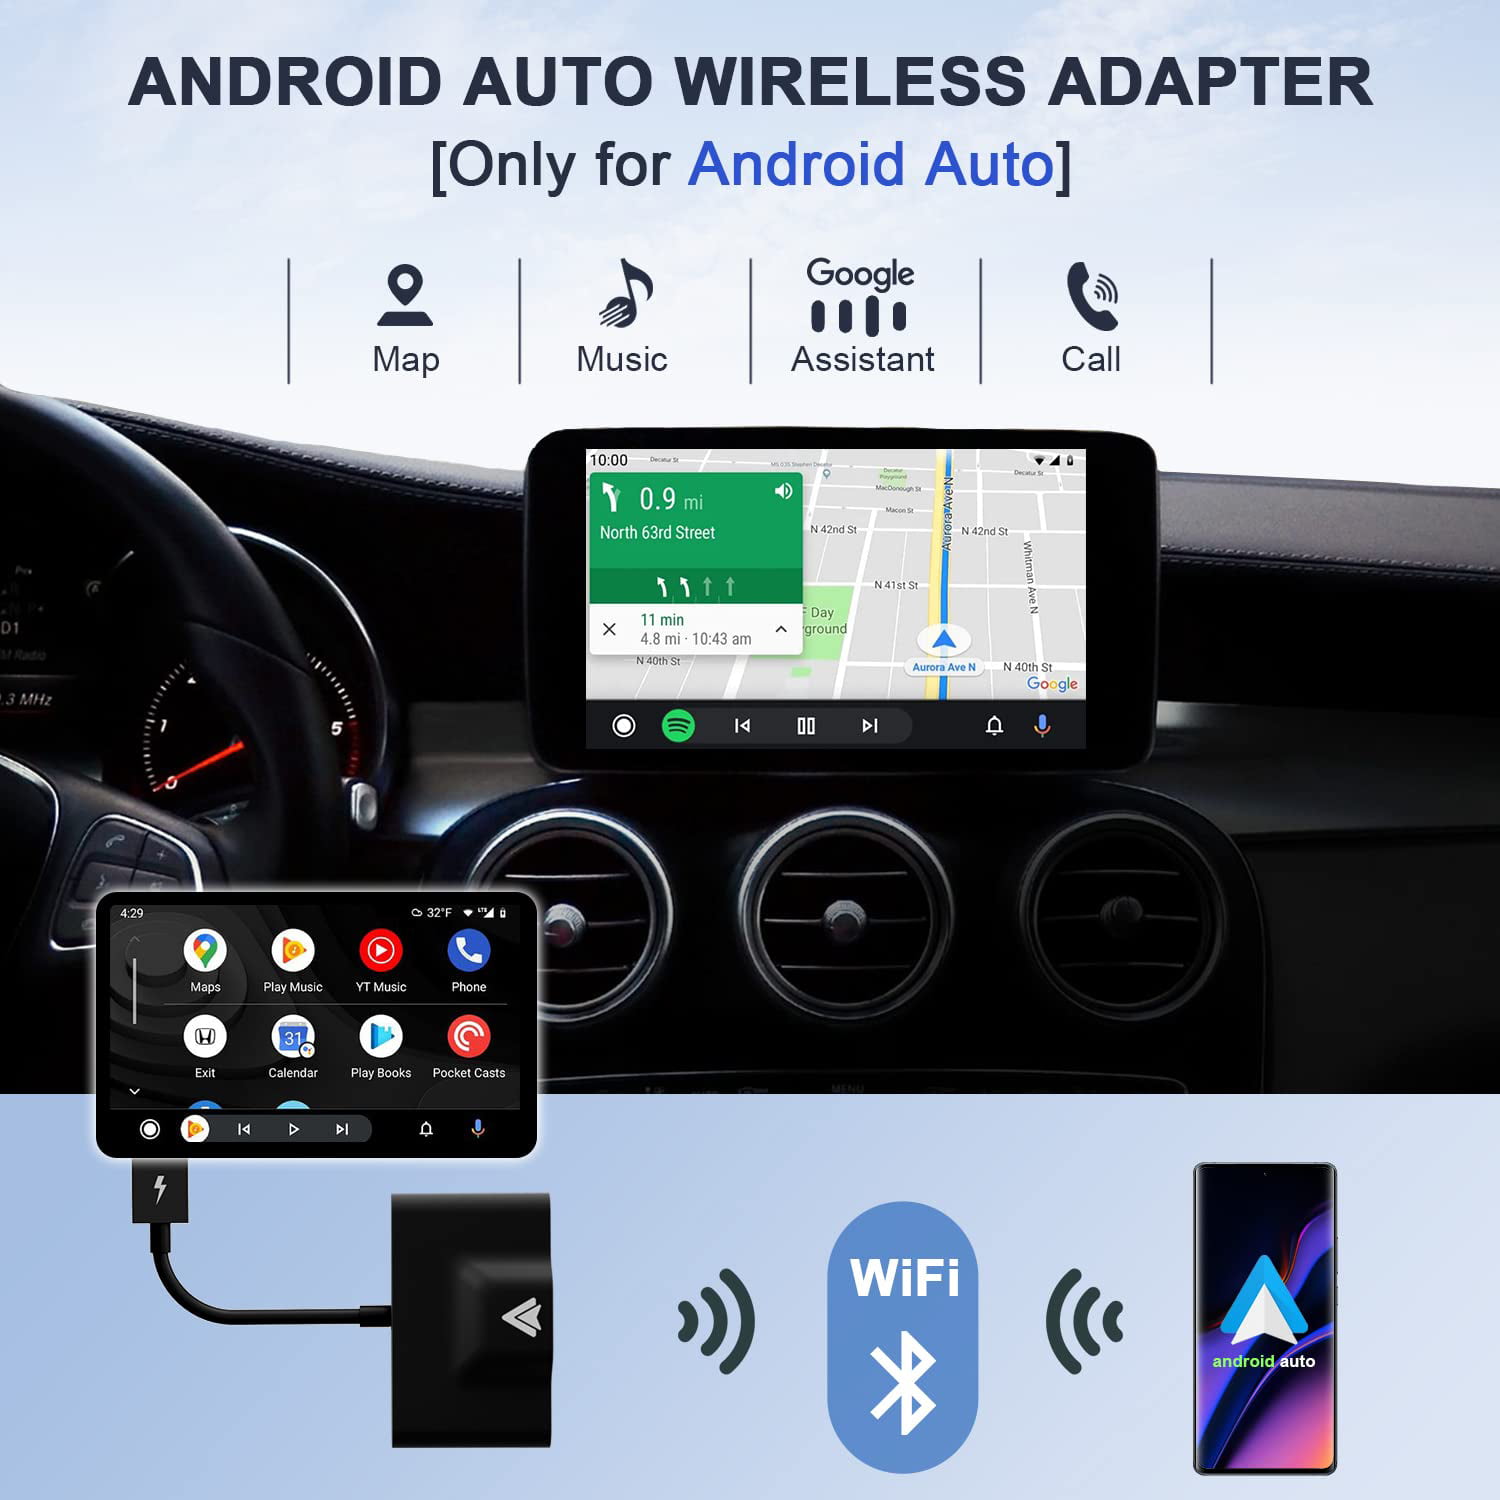 Android Auto Wireless Adapter for OEM Factory Wired Android Auto Cars Plug  & Play Easy Setup AA Wireless Android Auto Dongle for Android Phones  Converts Wired Android Auto to Wireless 